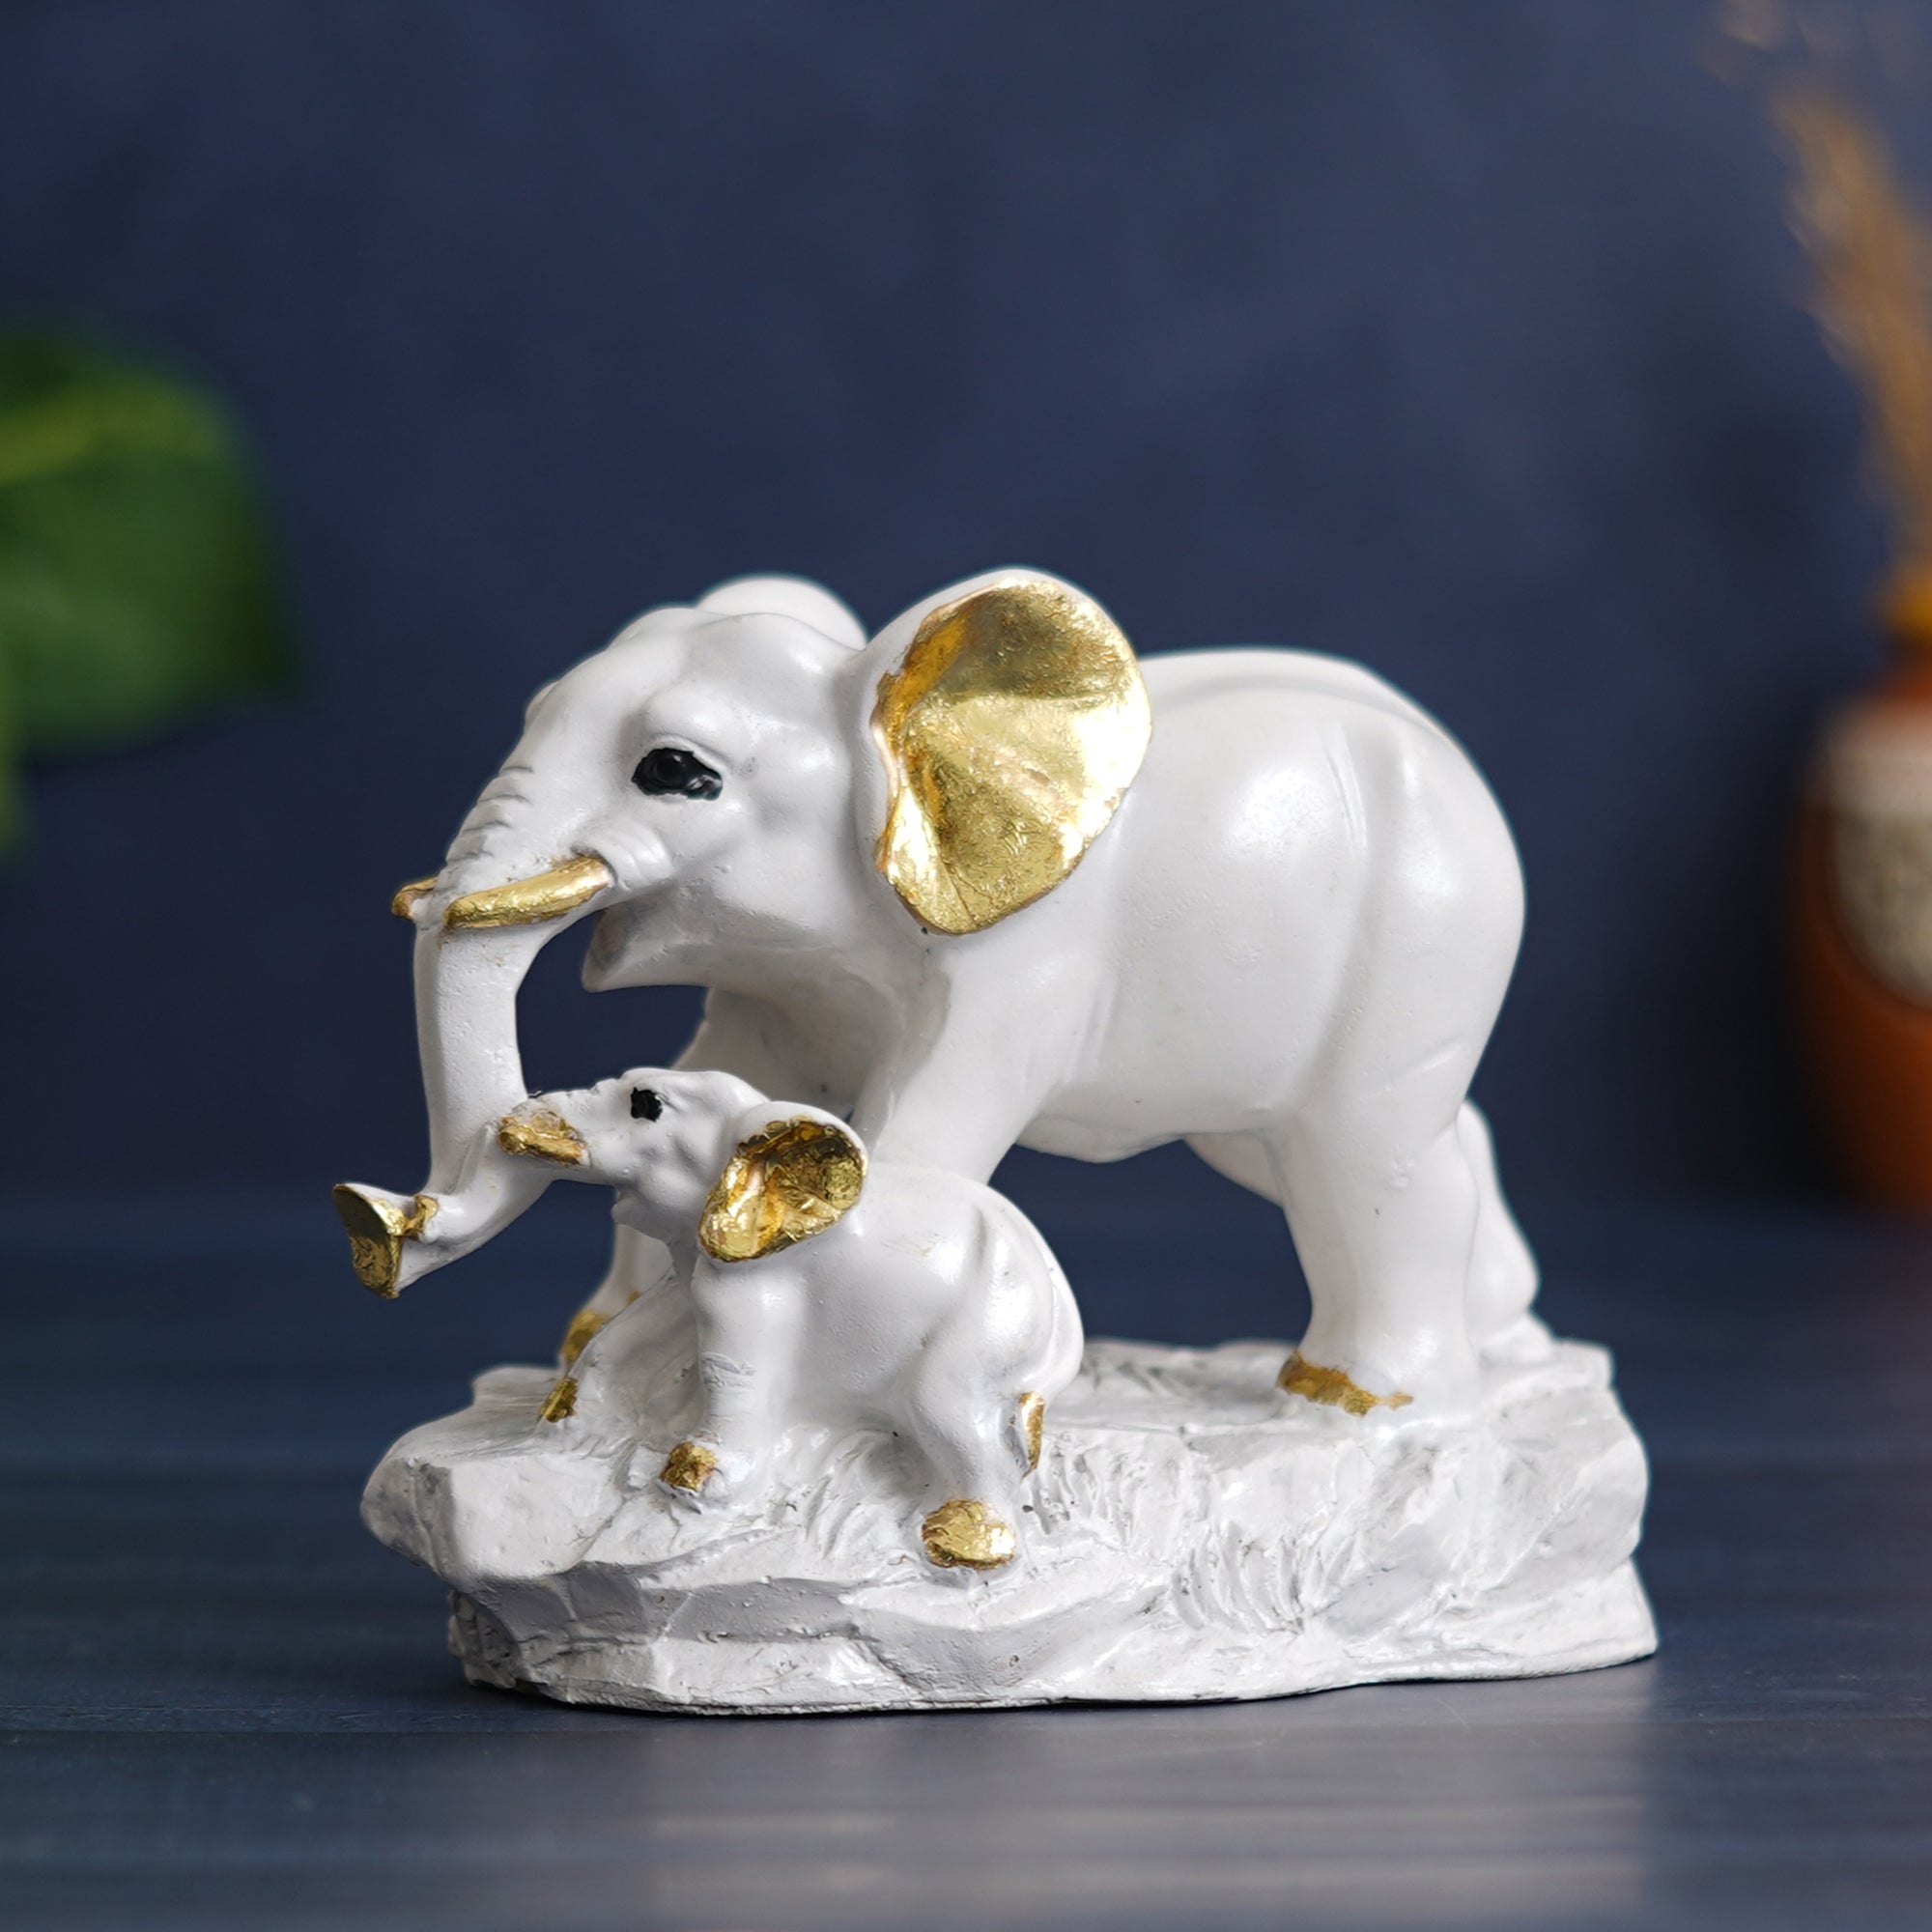 eCraftIndia White and Golden Cute Elephant with Baby Elephant Statues Animal Figurines Decorative Showpieces for Home Decor 1